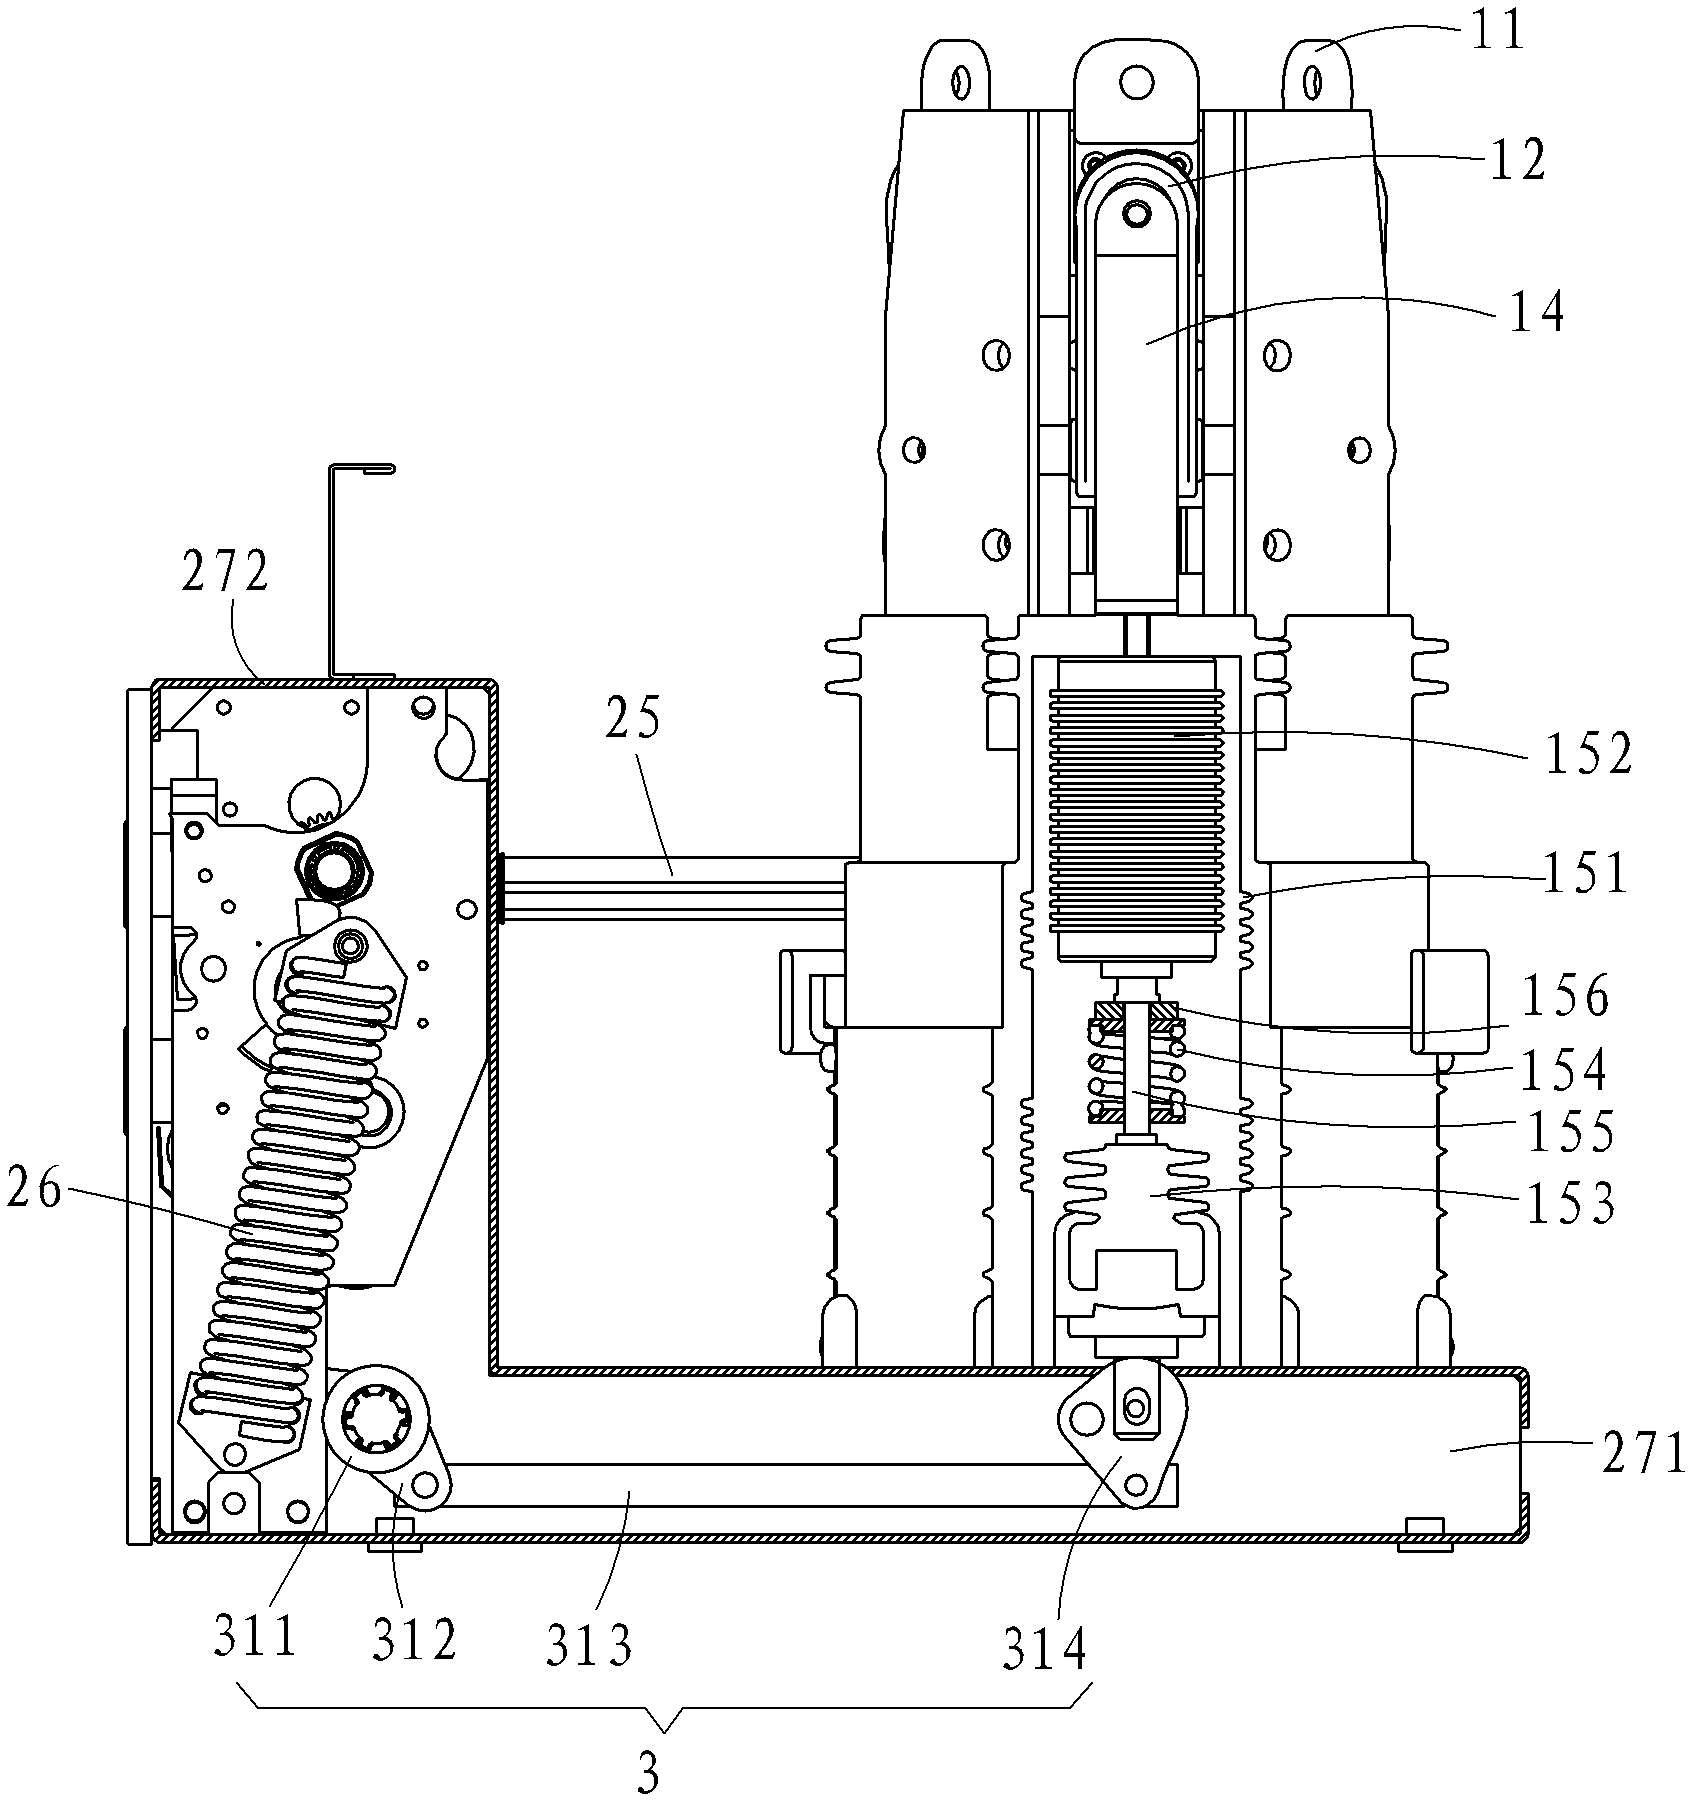 High-voltage switch with three-phase bodies in triangular distribution and high-voltage switch cabinet